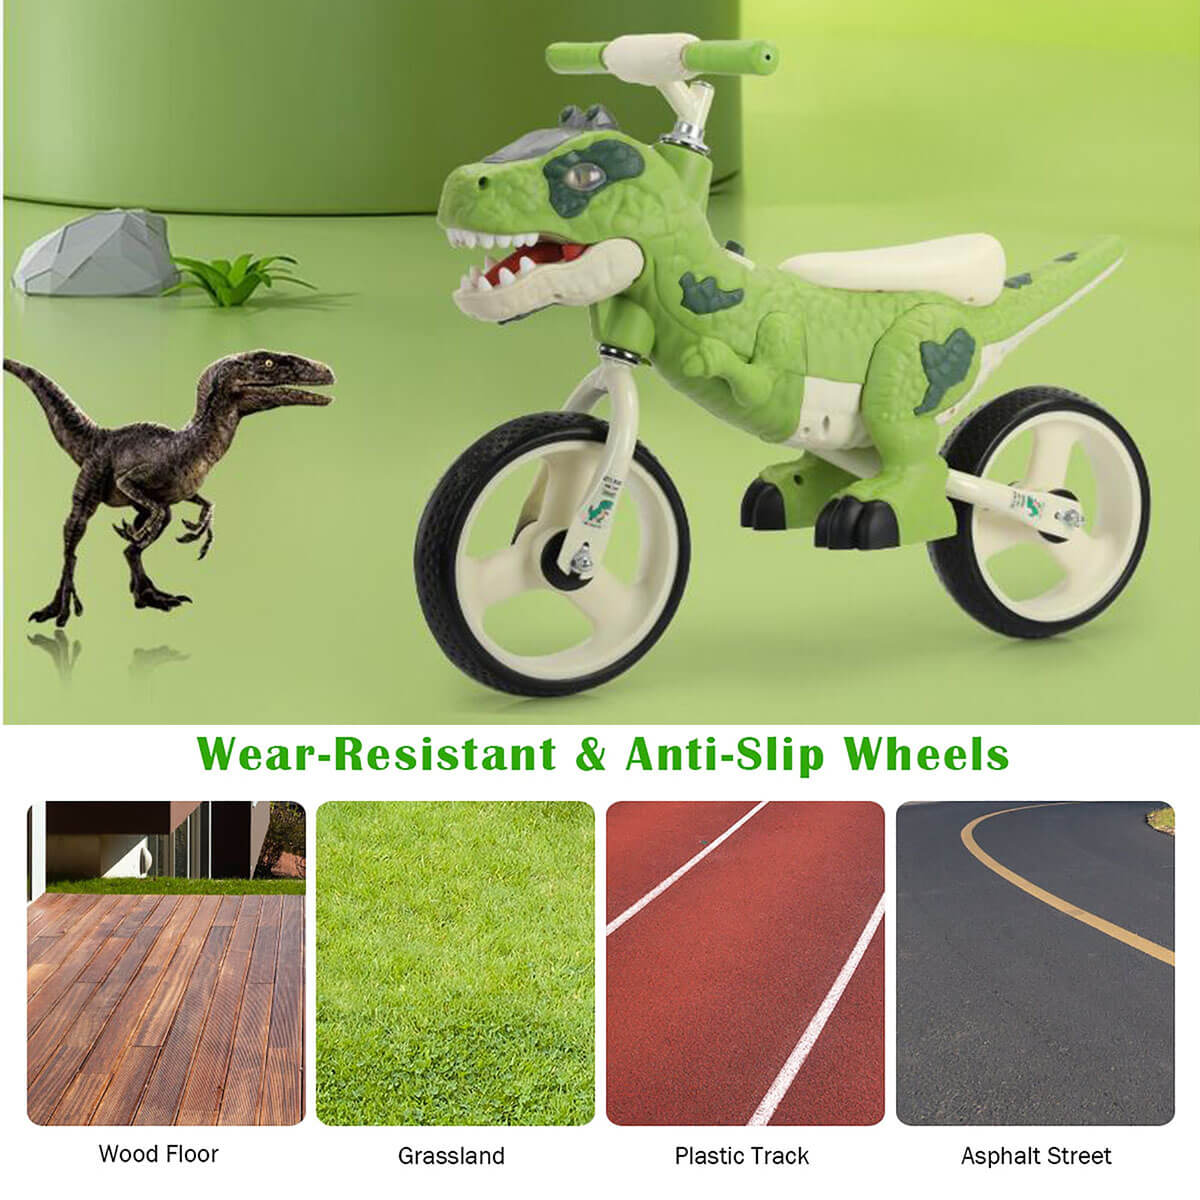 Kids Balance Bike/Tricycle Lightweight Frame Dinosaur Ride On Toys With Light & Music For Boys & Girls